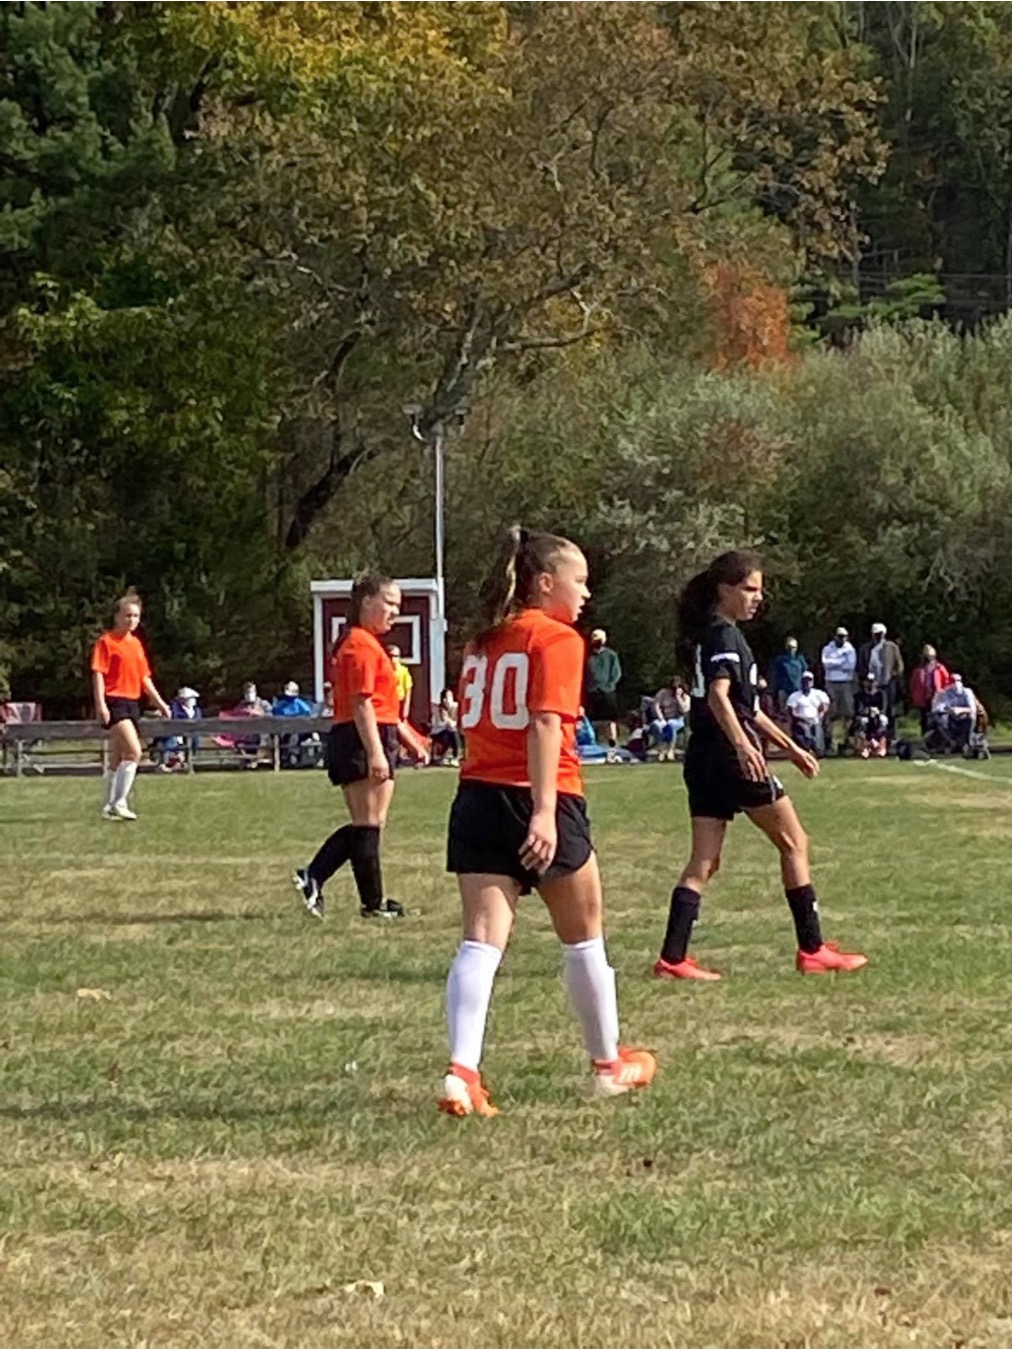 Caedence, #30, competes in a soccer game in October 2020.